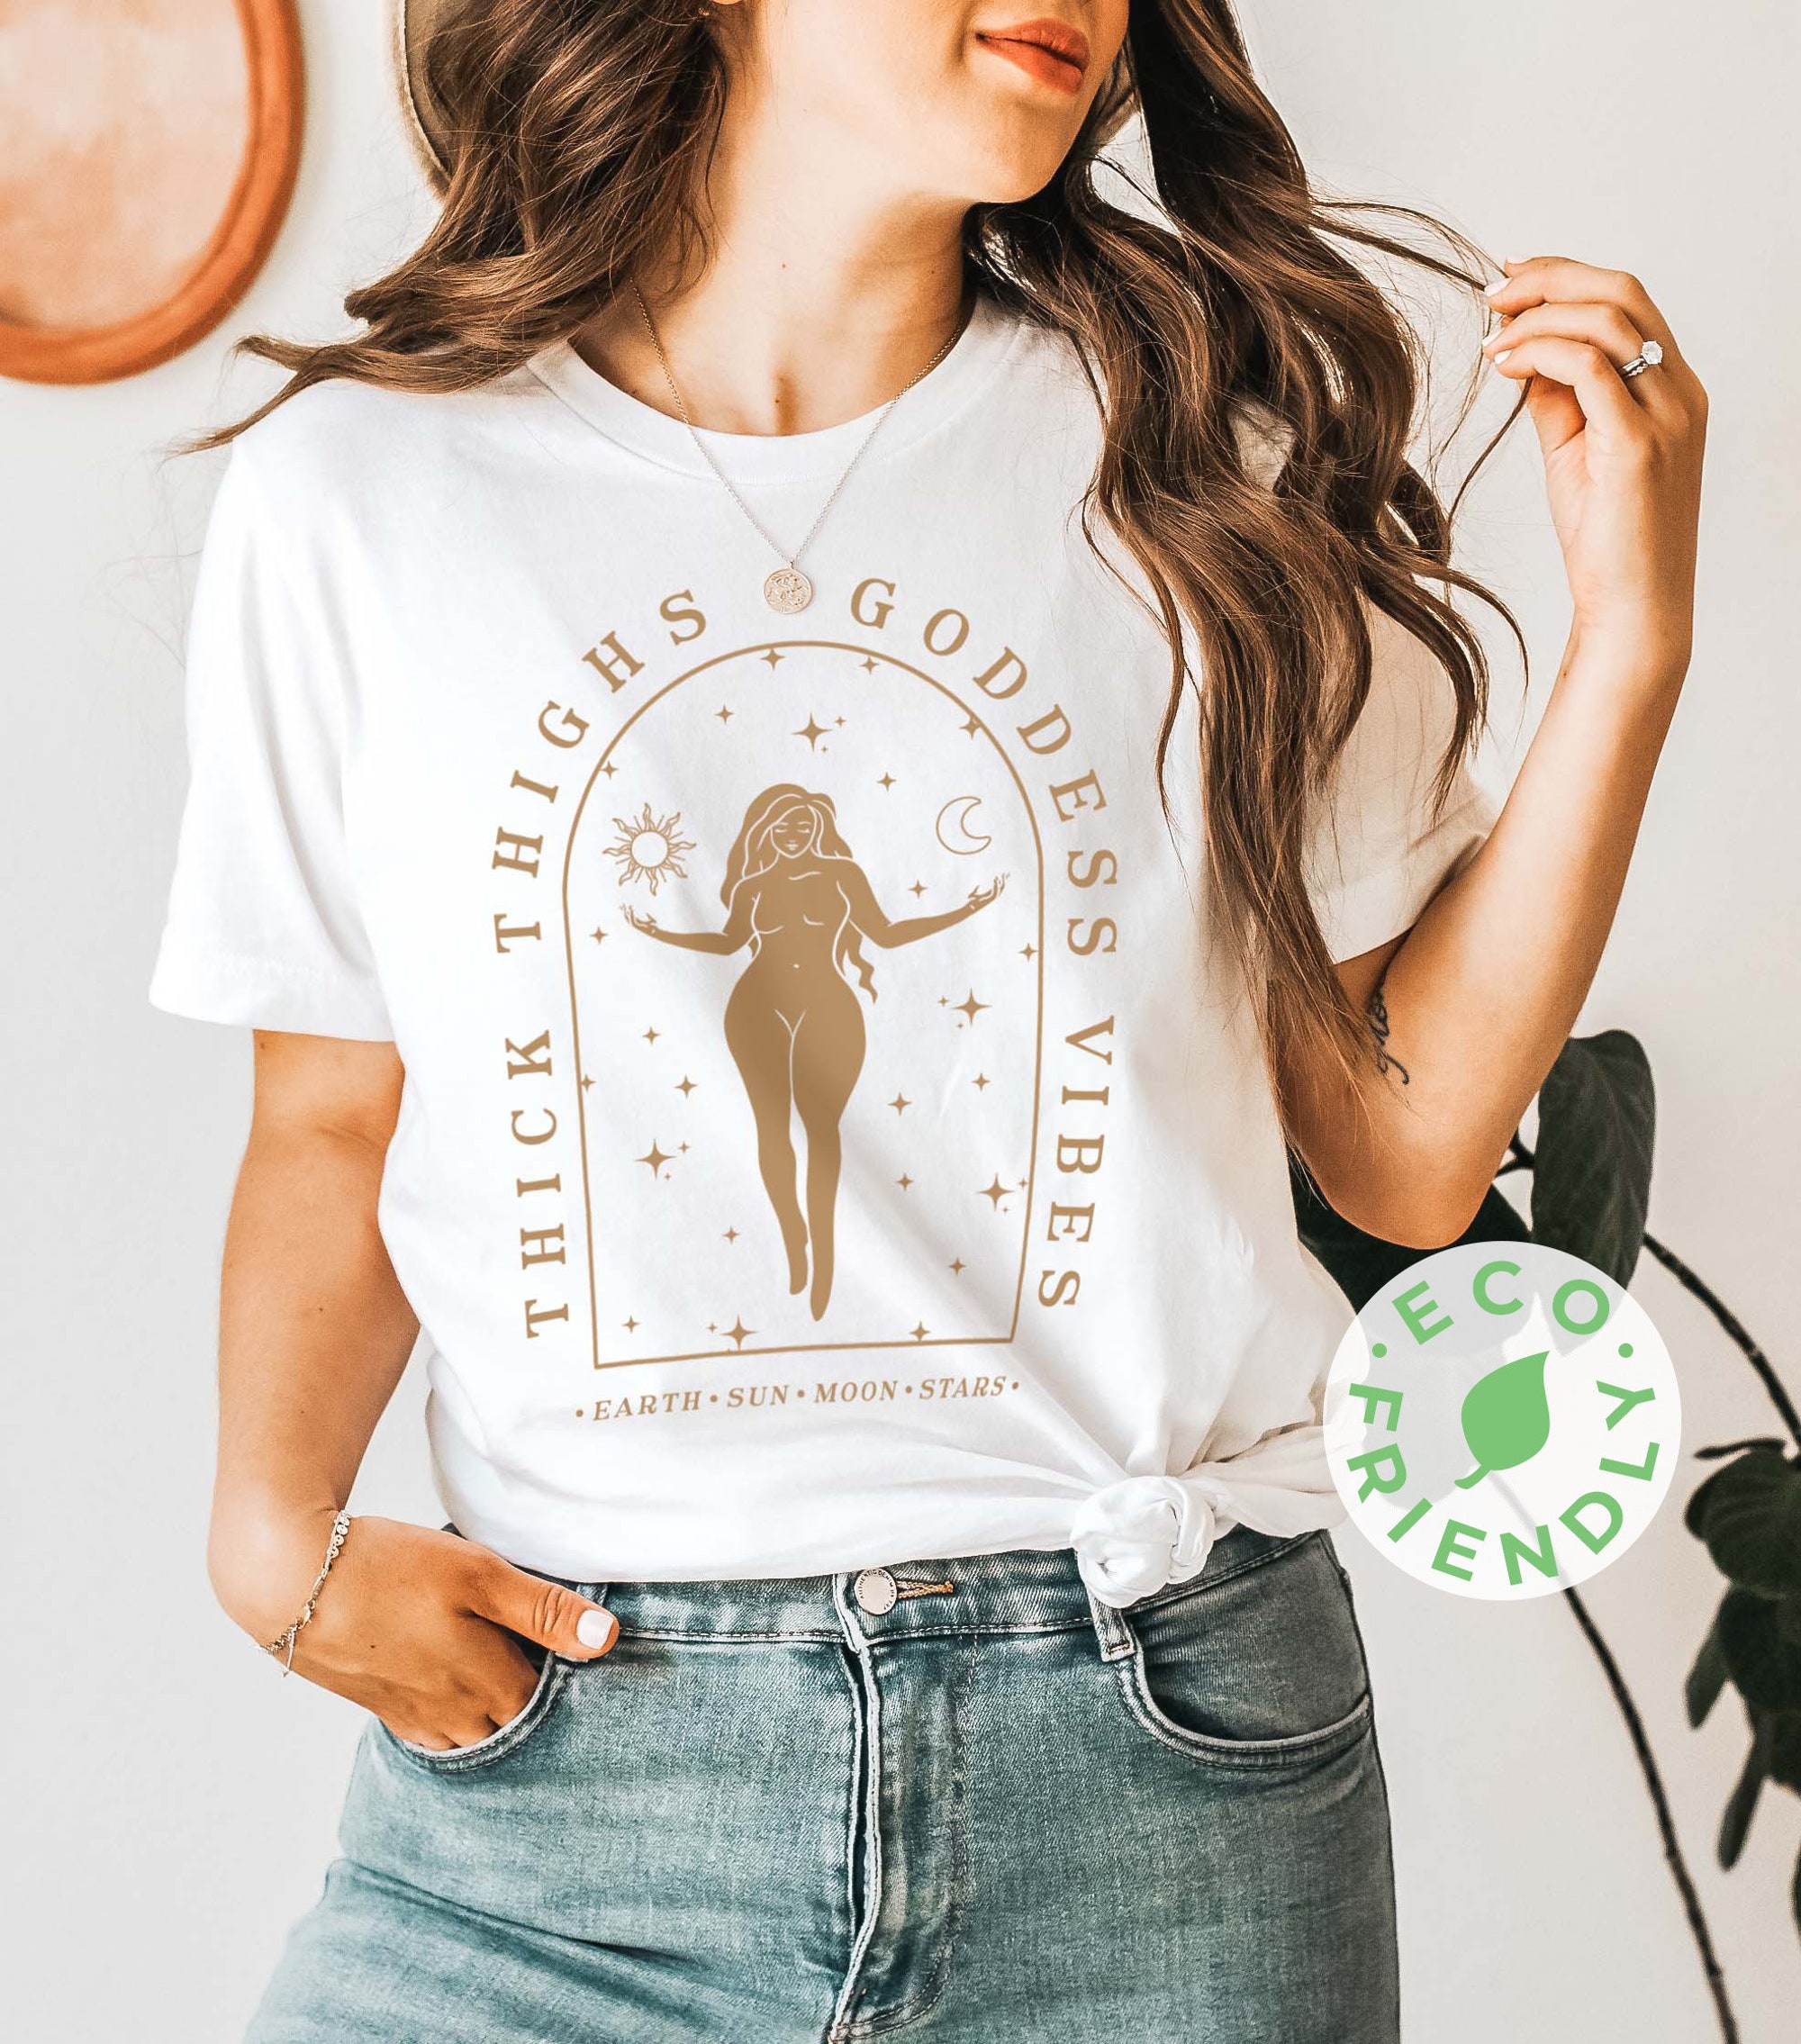 Discover Thick Thighs Goddess Vibes Moon Child Shirt Witchy Gifts Witchy Aesthetic Clothing Mystical Shirt